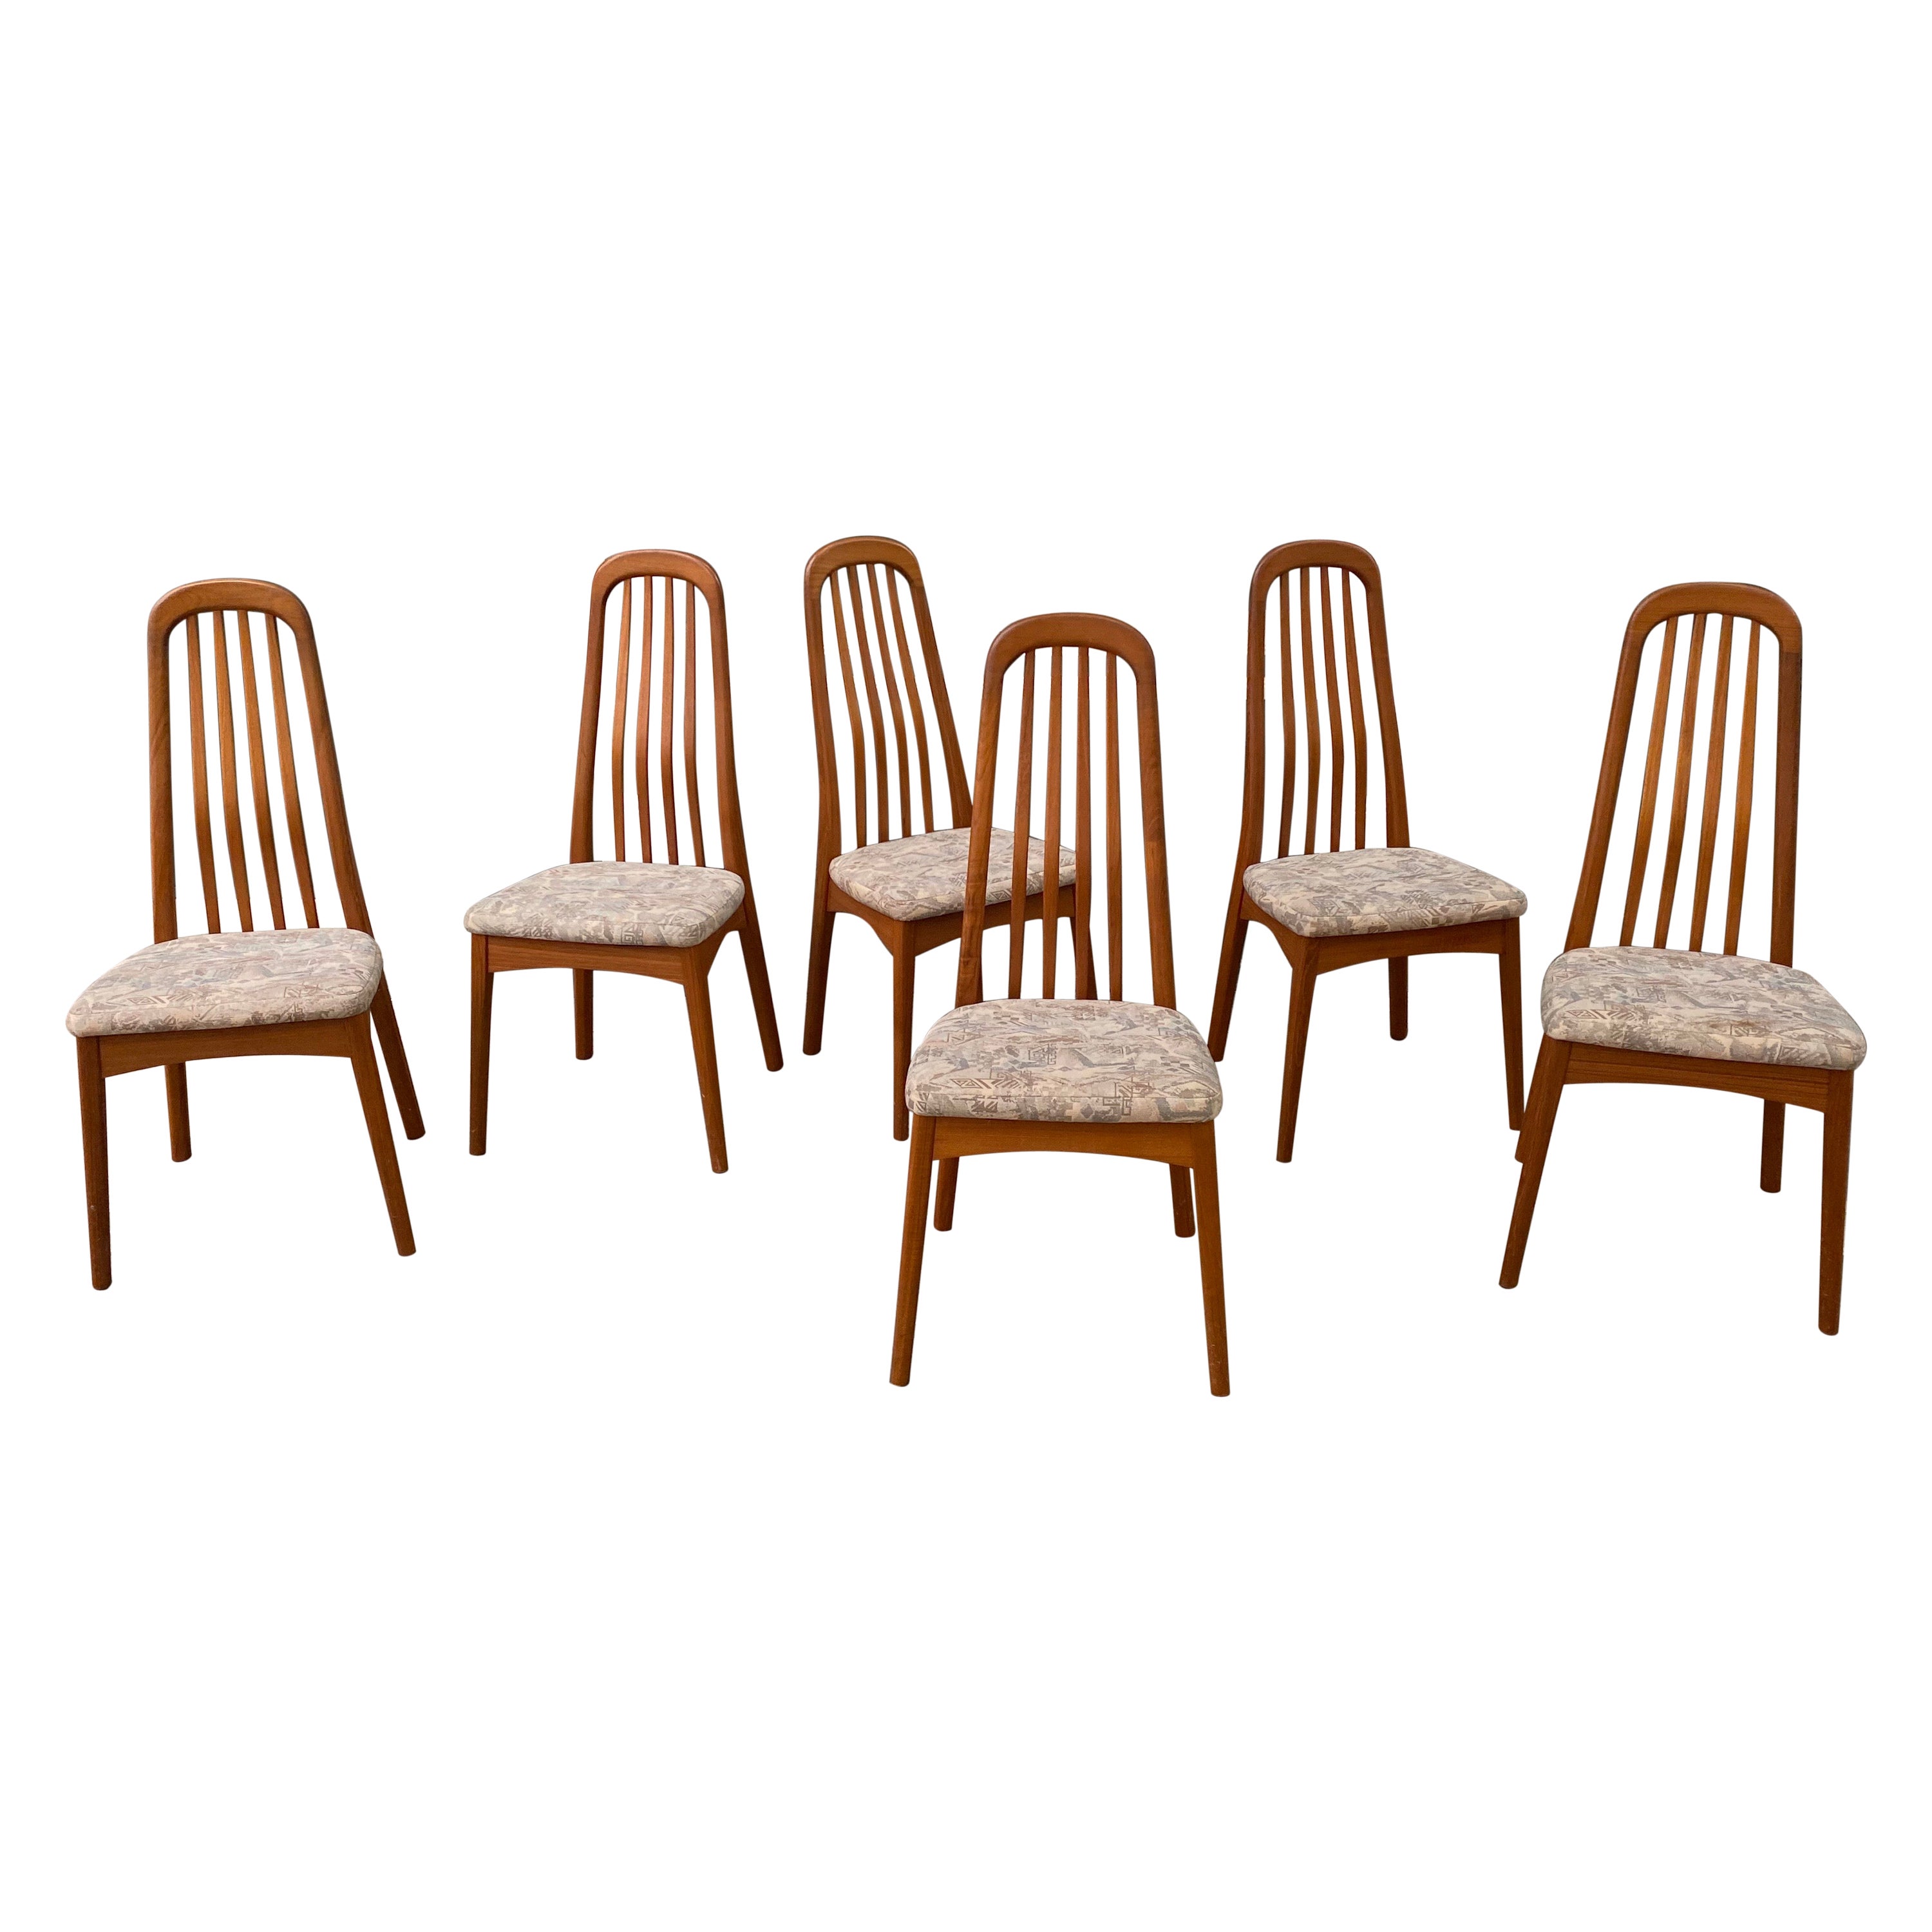 Set of 6 Solid Teak High Back Dining Chairs by Benny Linden